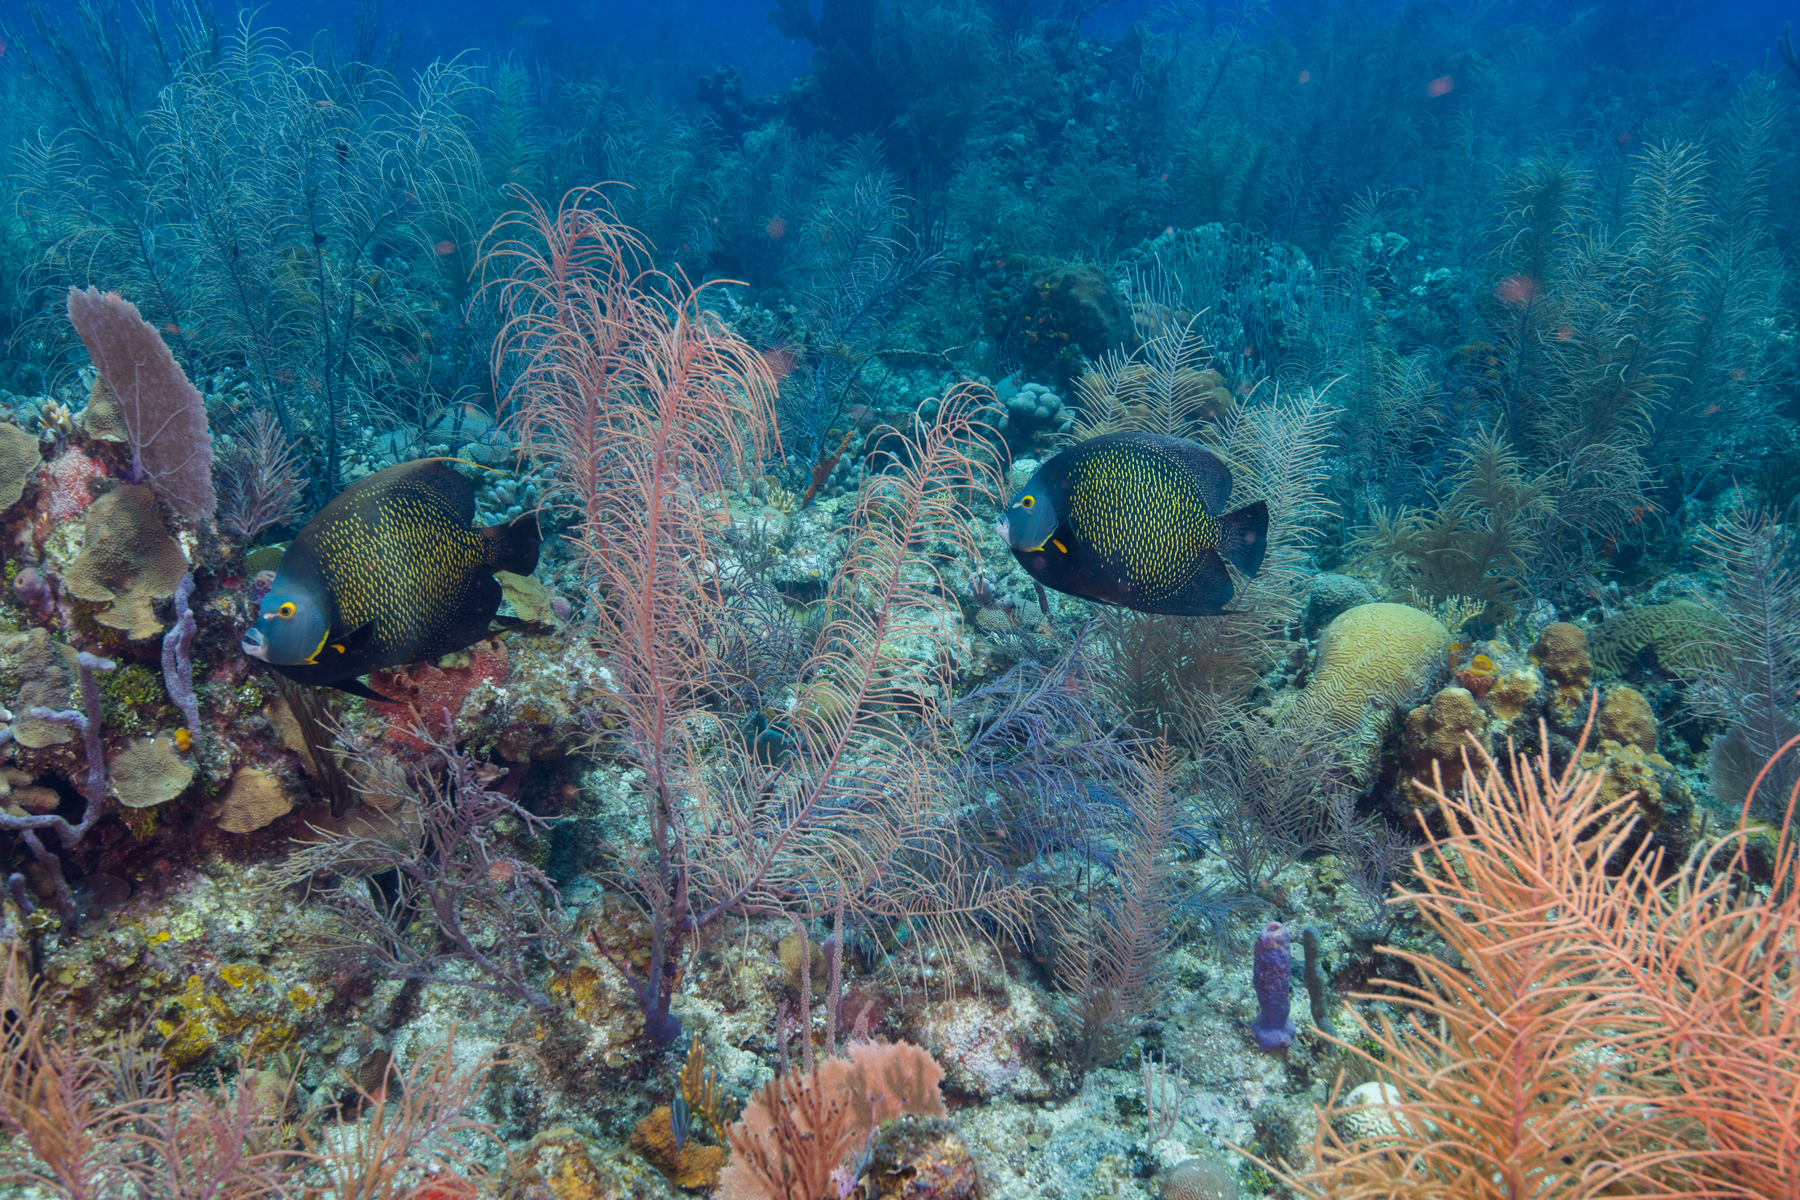 10/2/2021A pair of French Angelfish tagging along with us.  